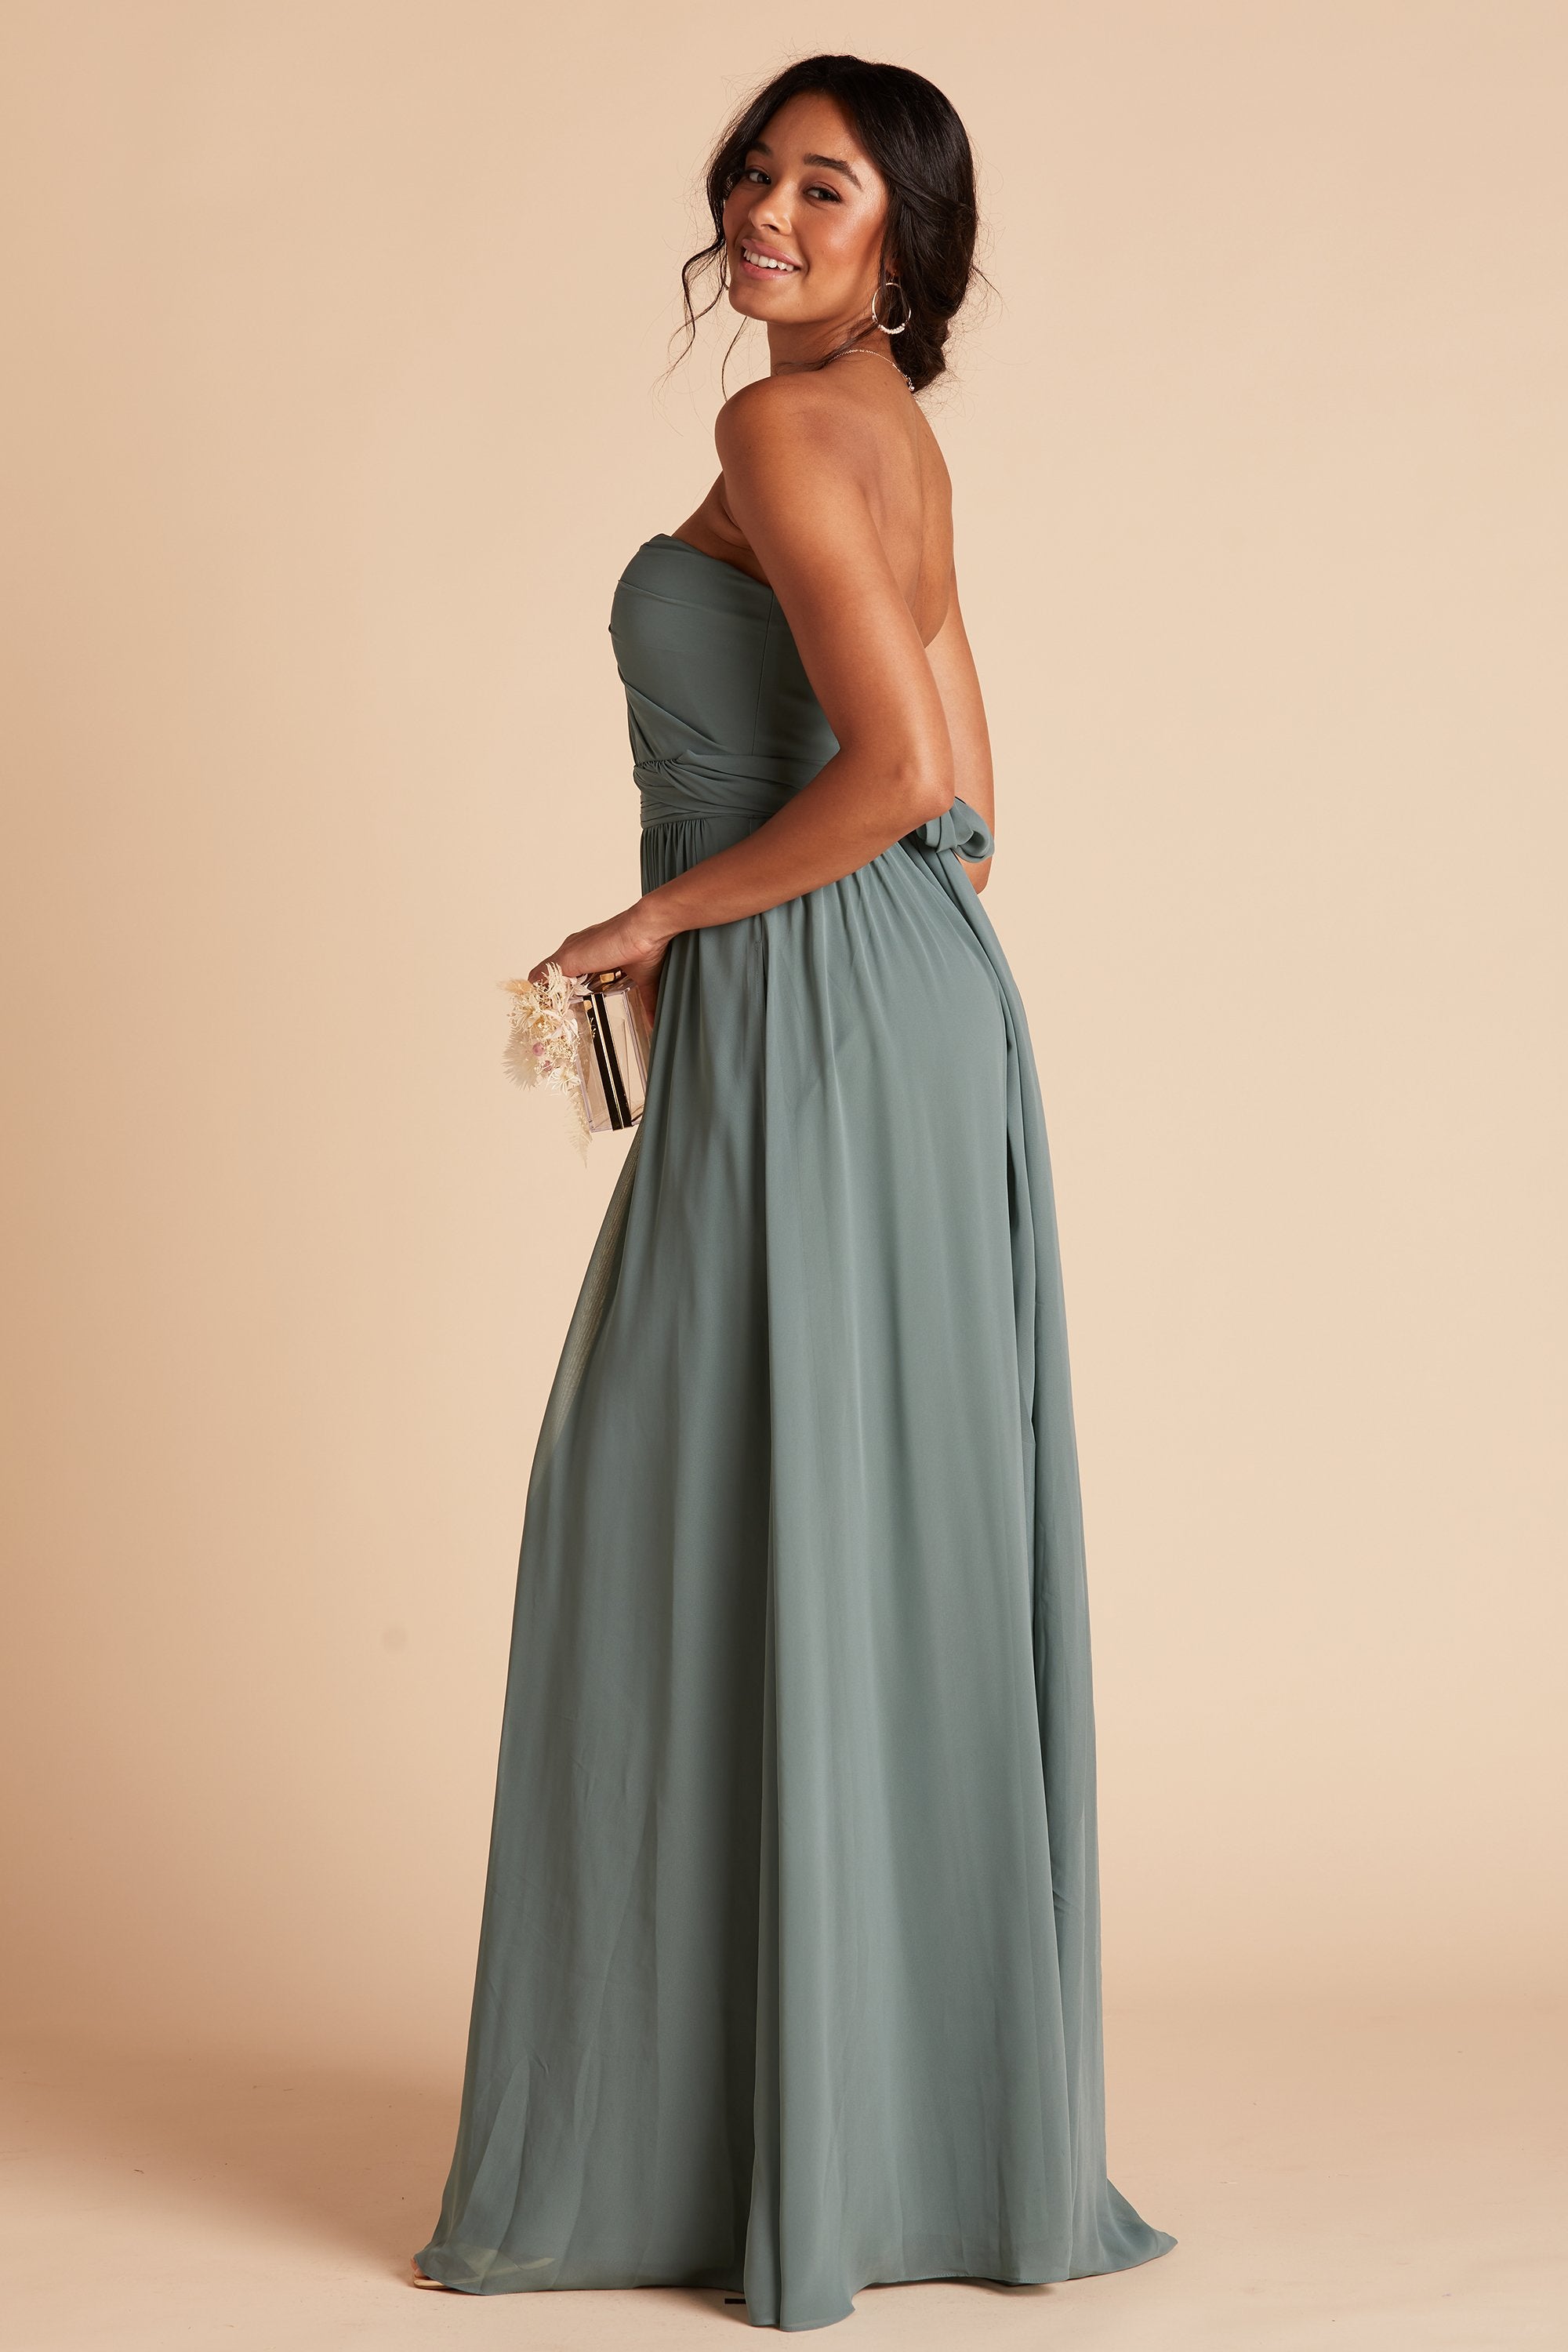 Side view of the Grace Convertible Bridesmaid Dress in sea glass chiffon reveals a fitted bust with a floor-length skirt flowing from the waist.